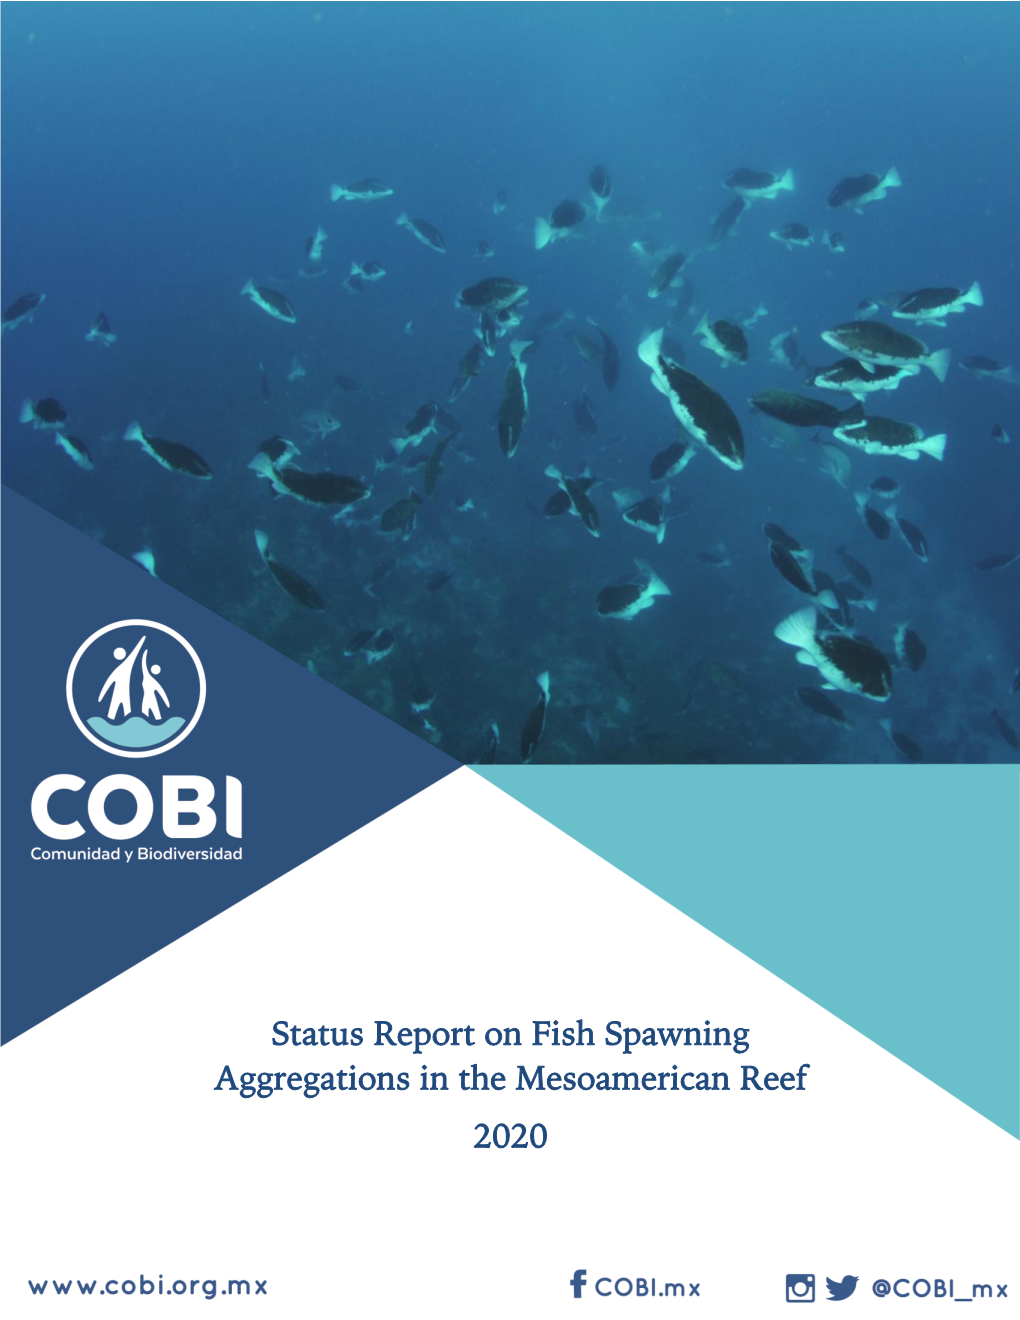 Status Report on Fish Spawning Aggregations in the Mesoamerican Reef 2020